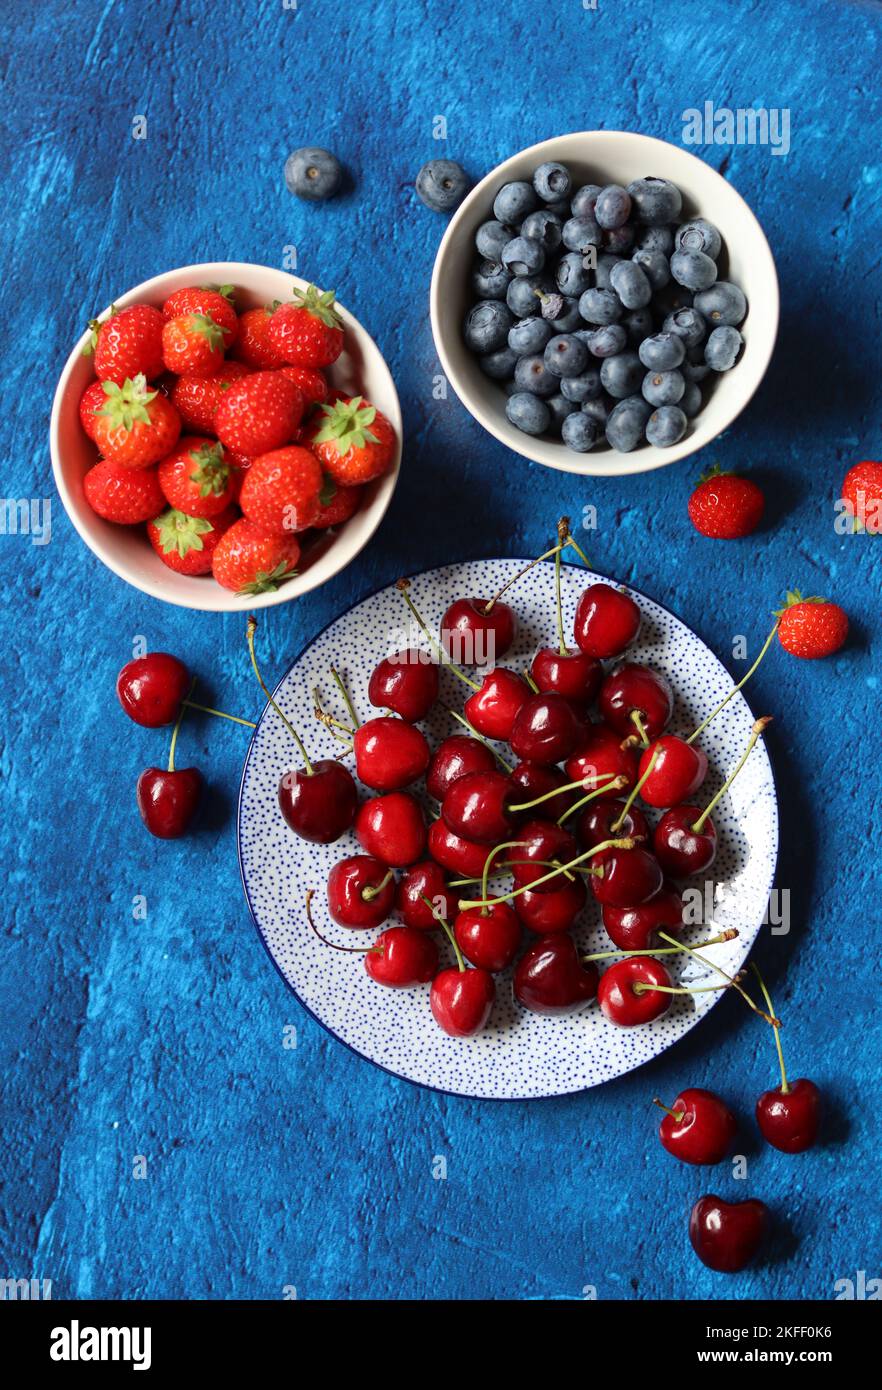 Summer still life with fresh berries on ceramic plates. Top view photo of organic cherry, blueberry and strawberry. Healthy eating concept. Stock Photo